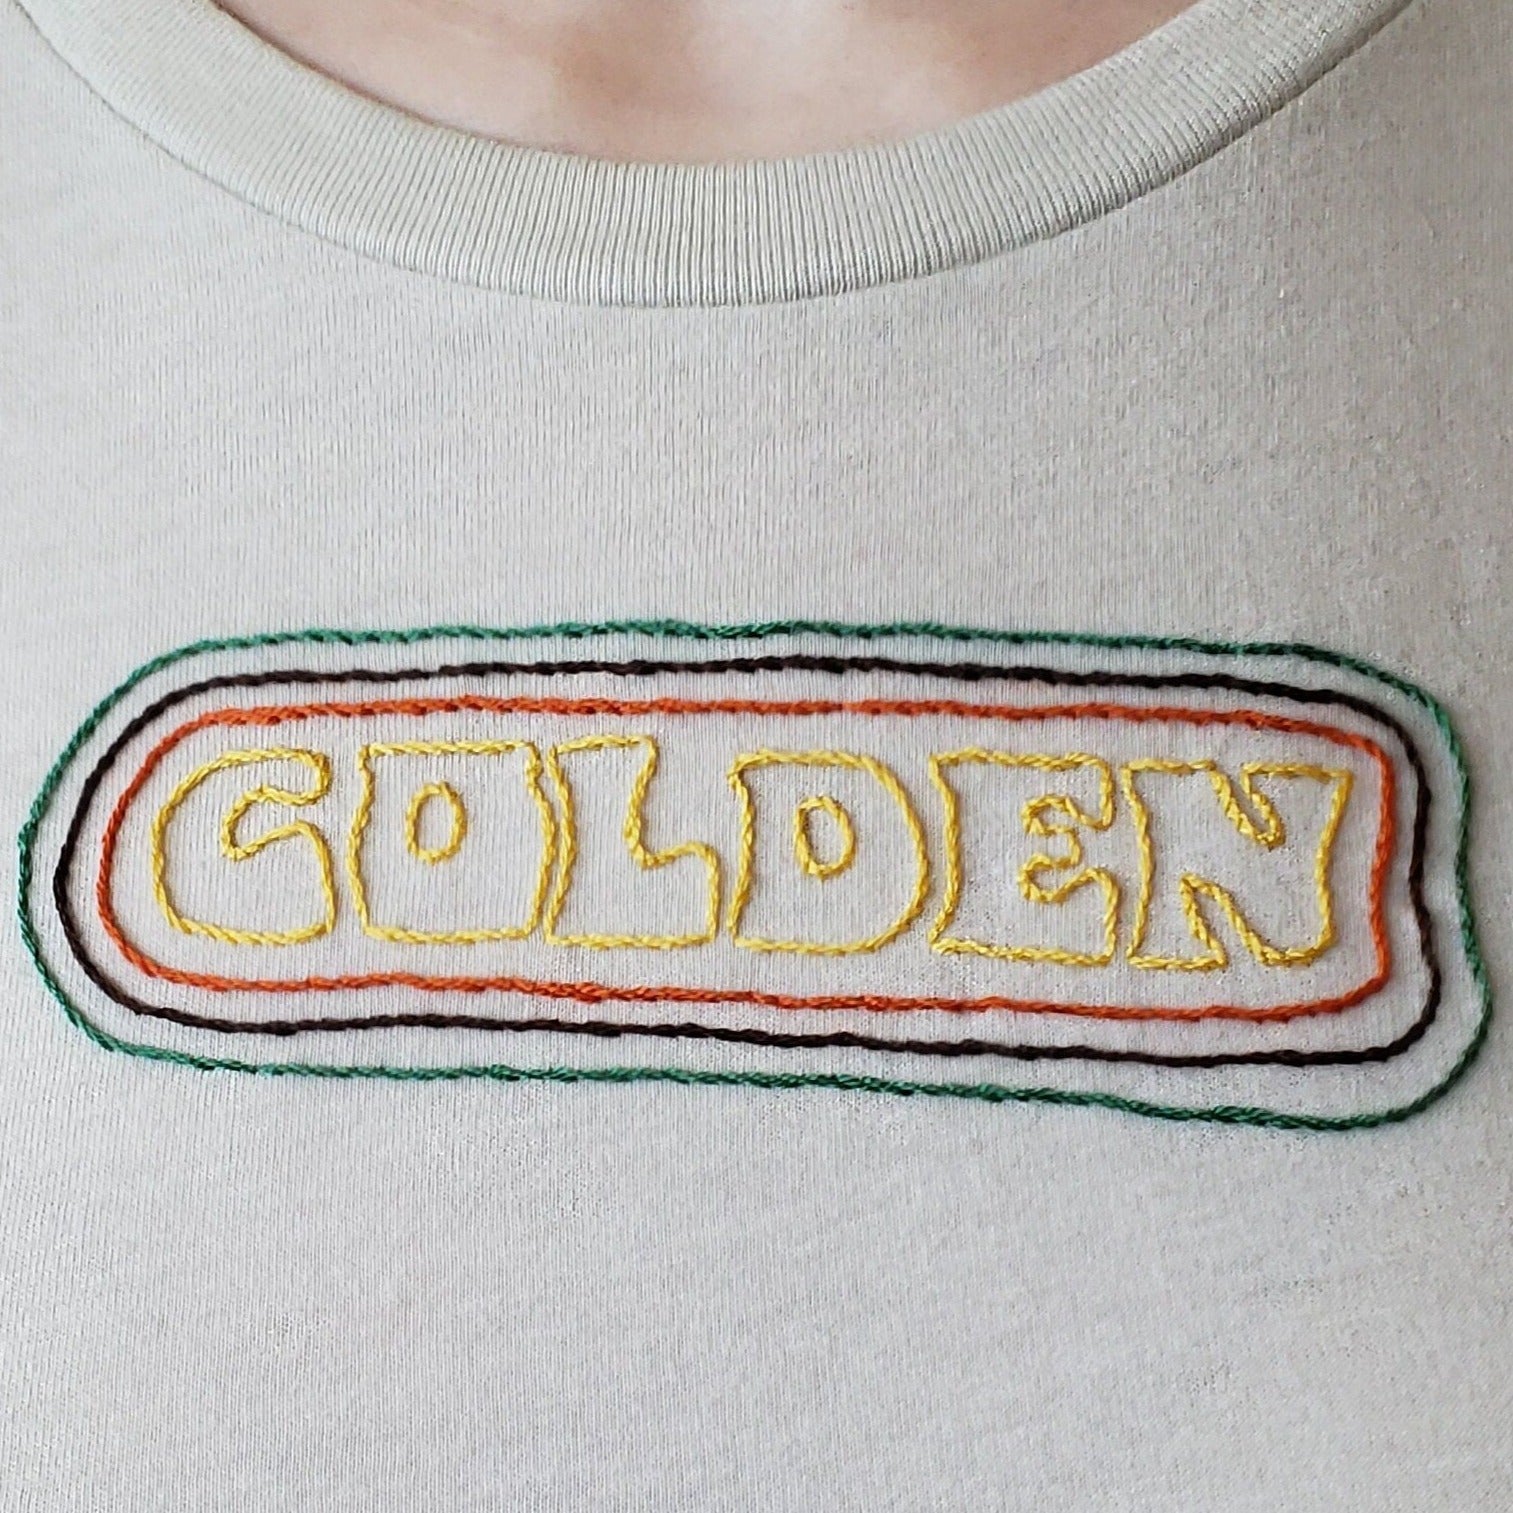 A close up of the text on a sandstone crewneck tee. "GOLDEN" is hand sewn in a groovy font, and the text is encircled by three hand sewn lines. The closest is orange, followed by brown and then green. The decoration sits about 2.5 inches down from the collar.